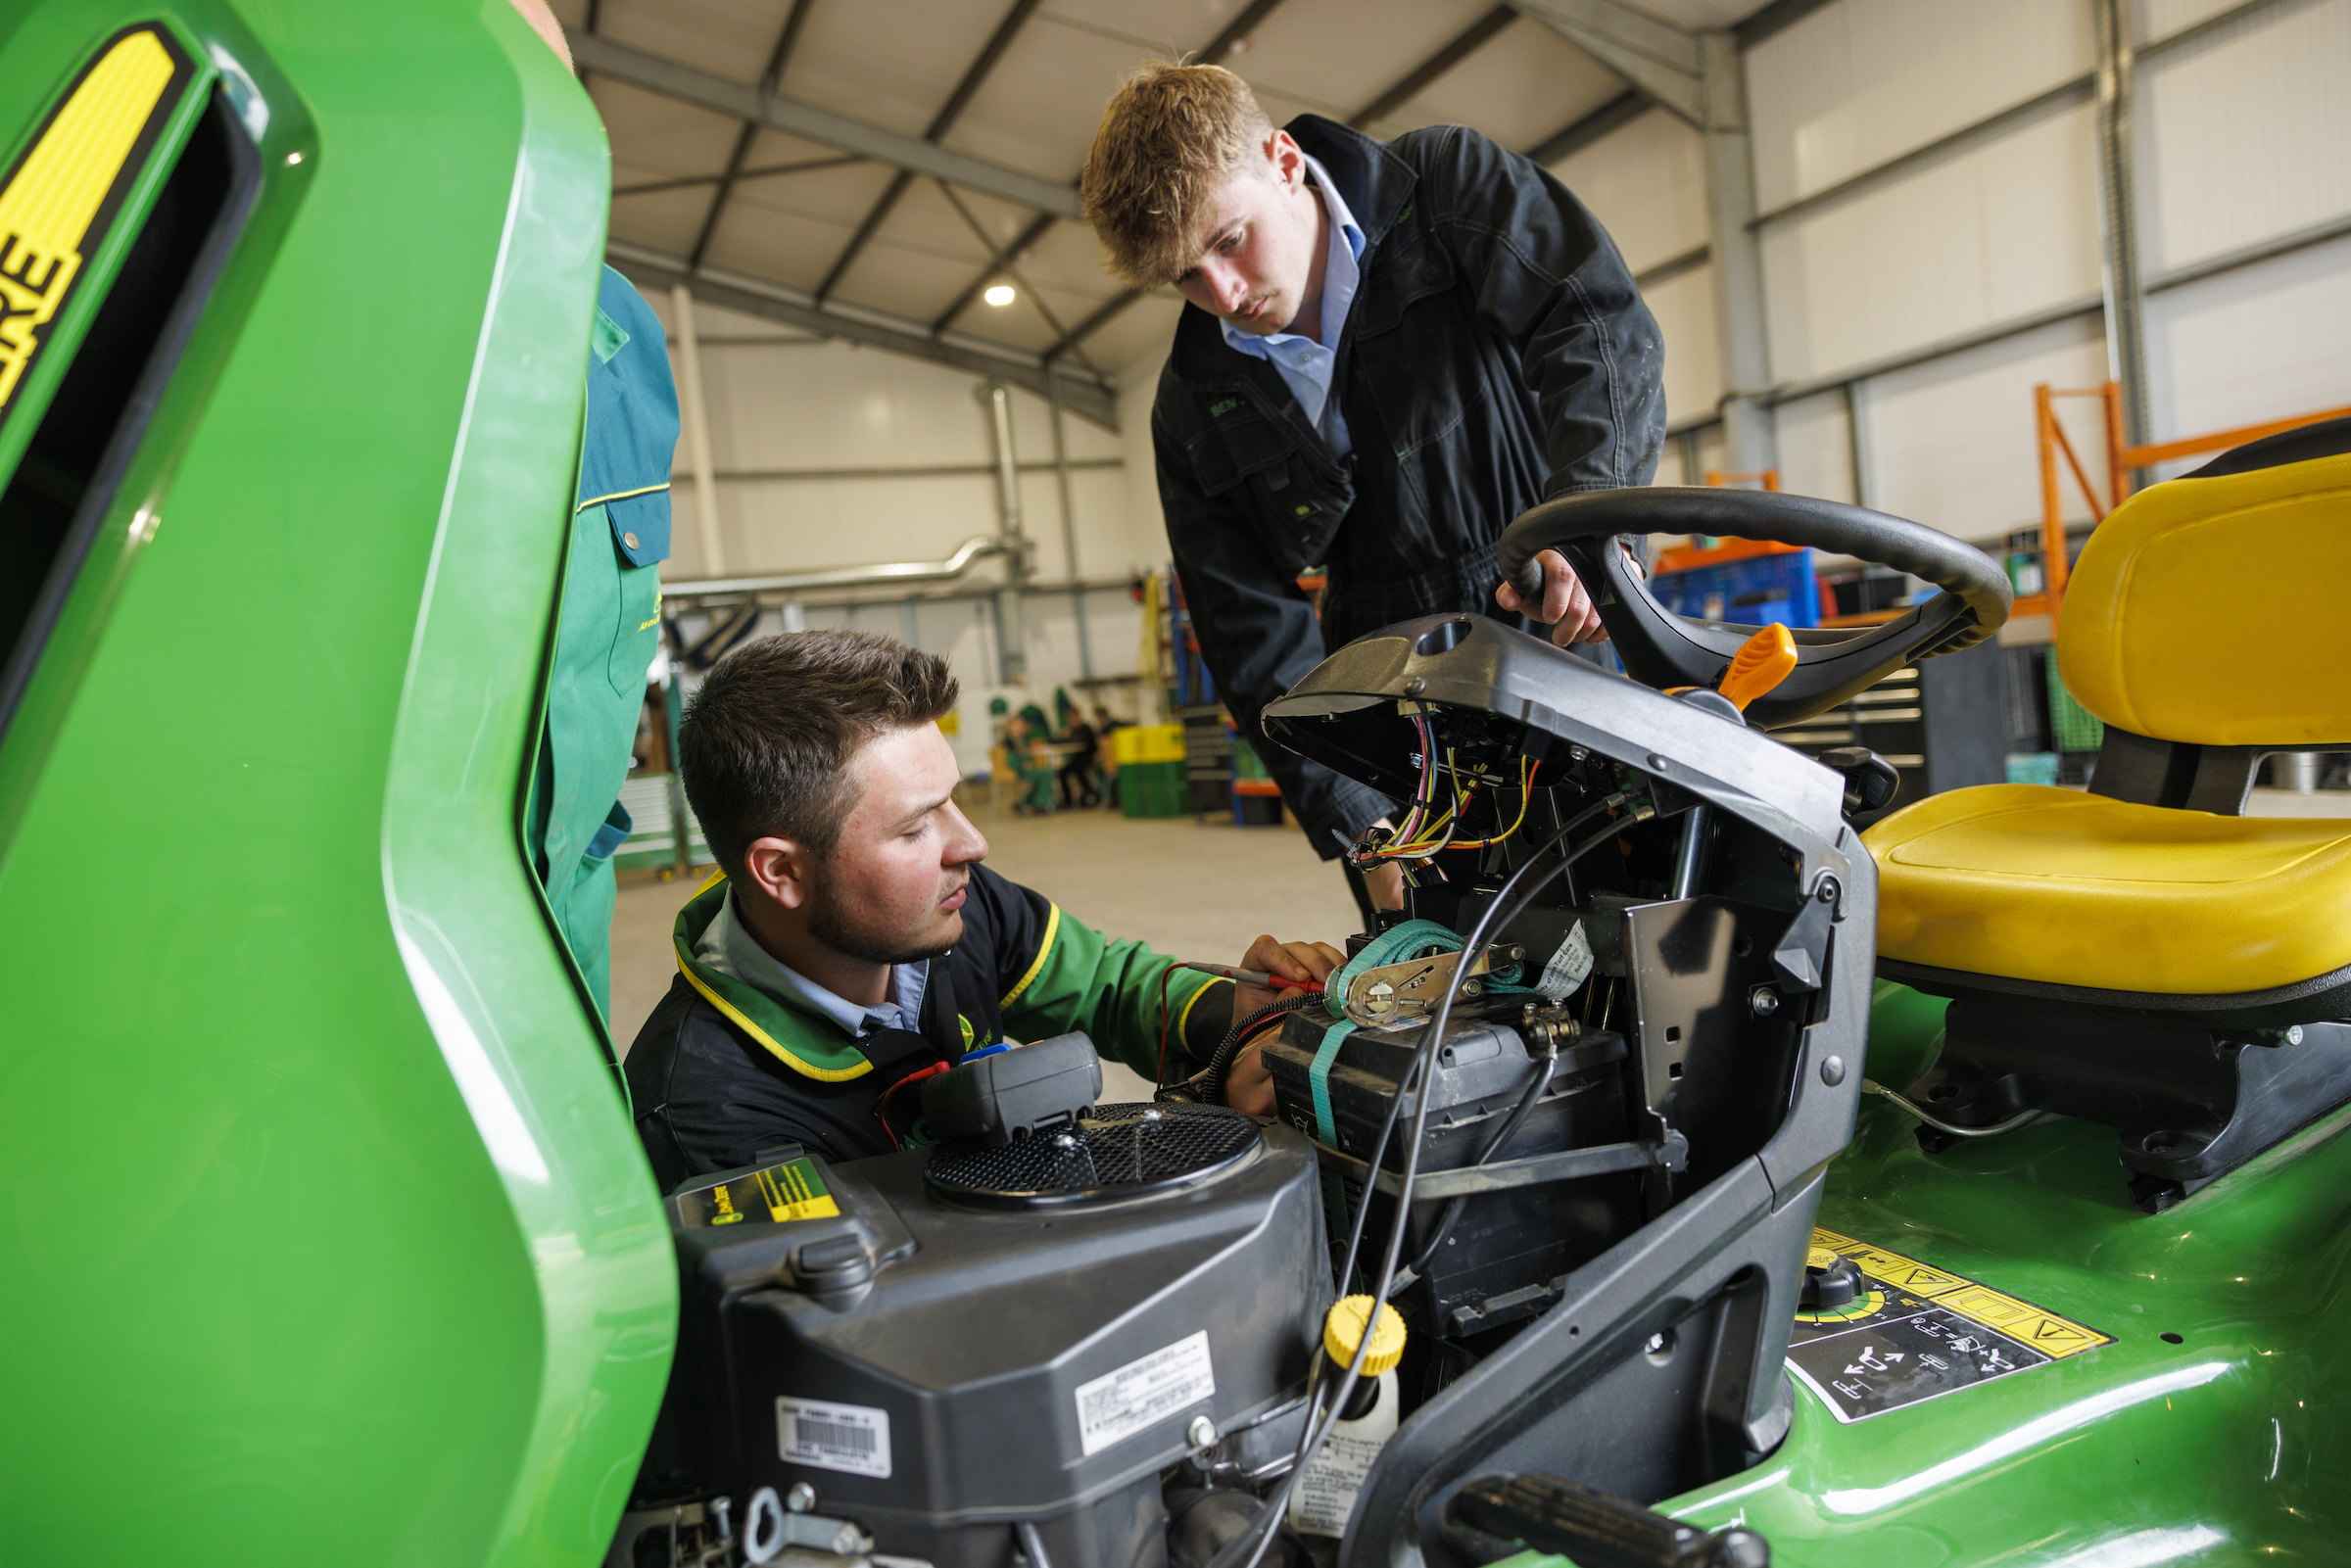 Apprentices can work on agricultural or turfcare machinery, or opt for a qualification in parts and service.